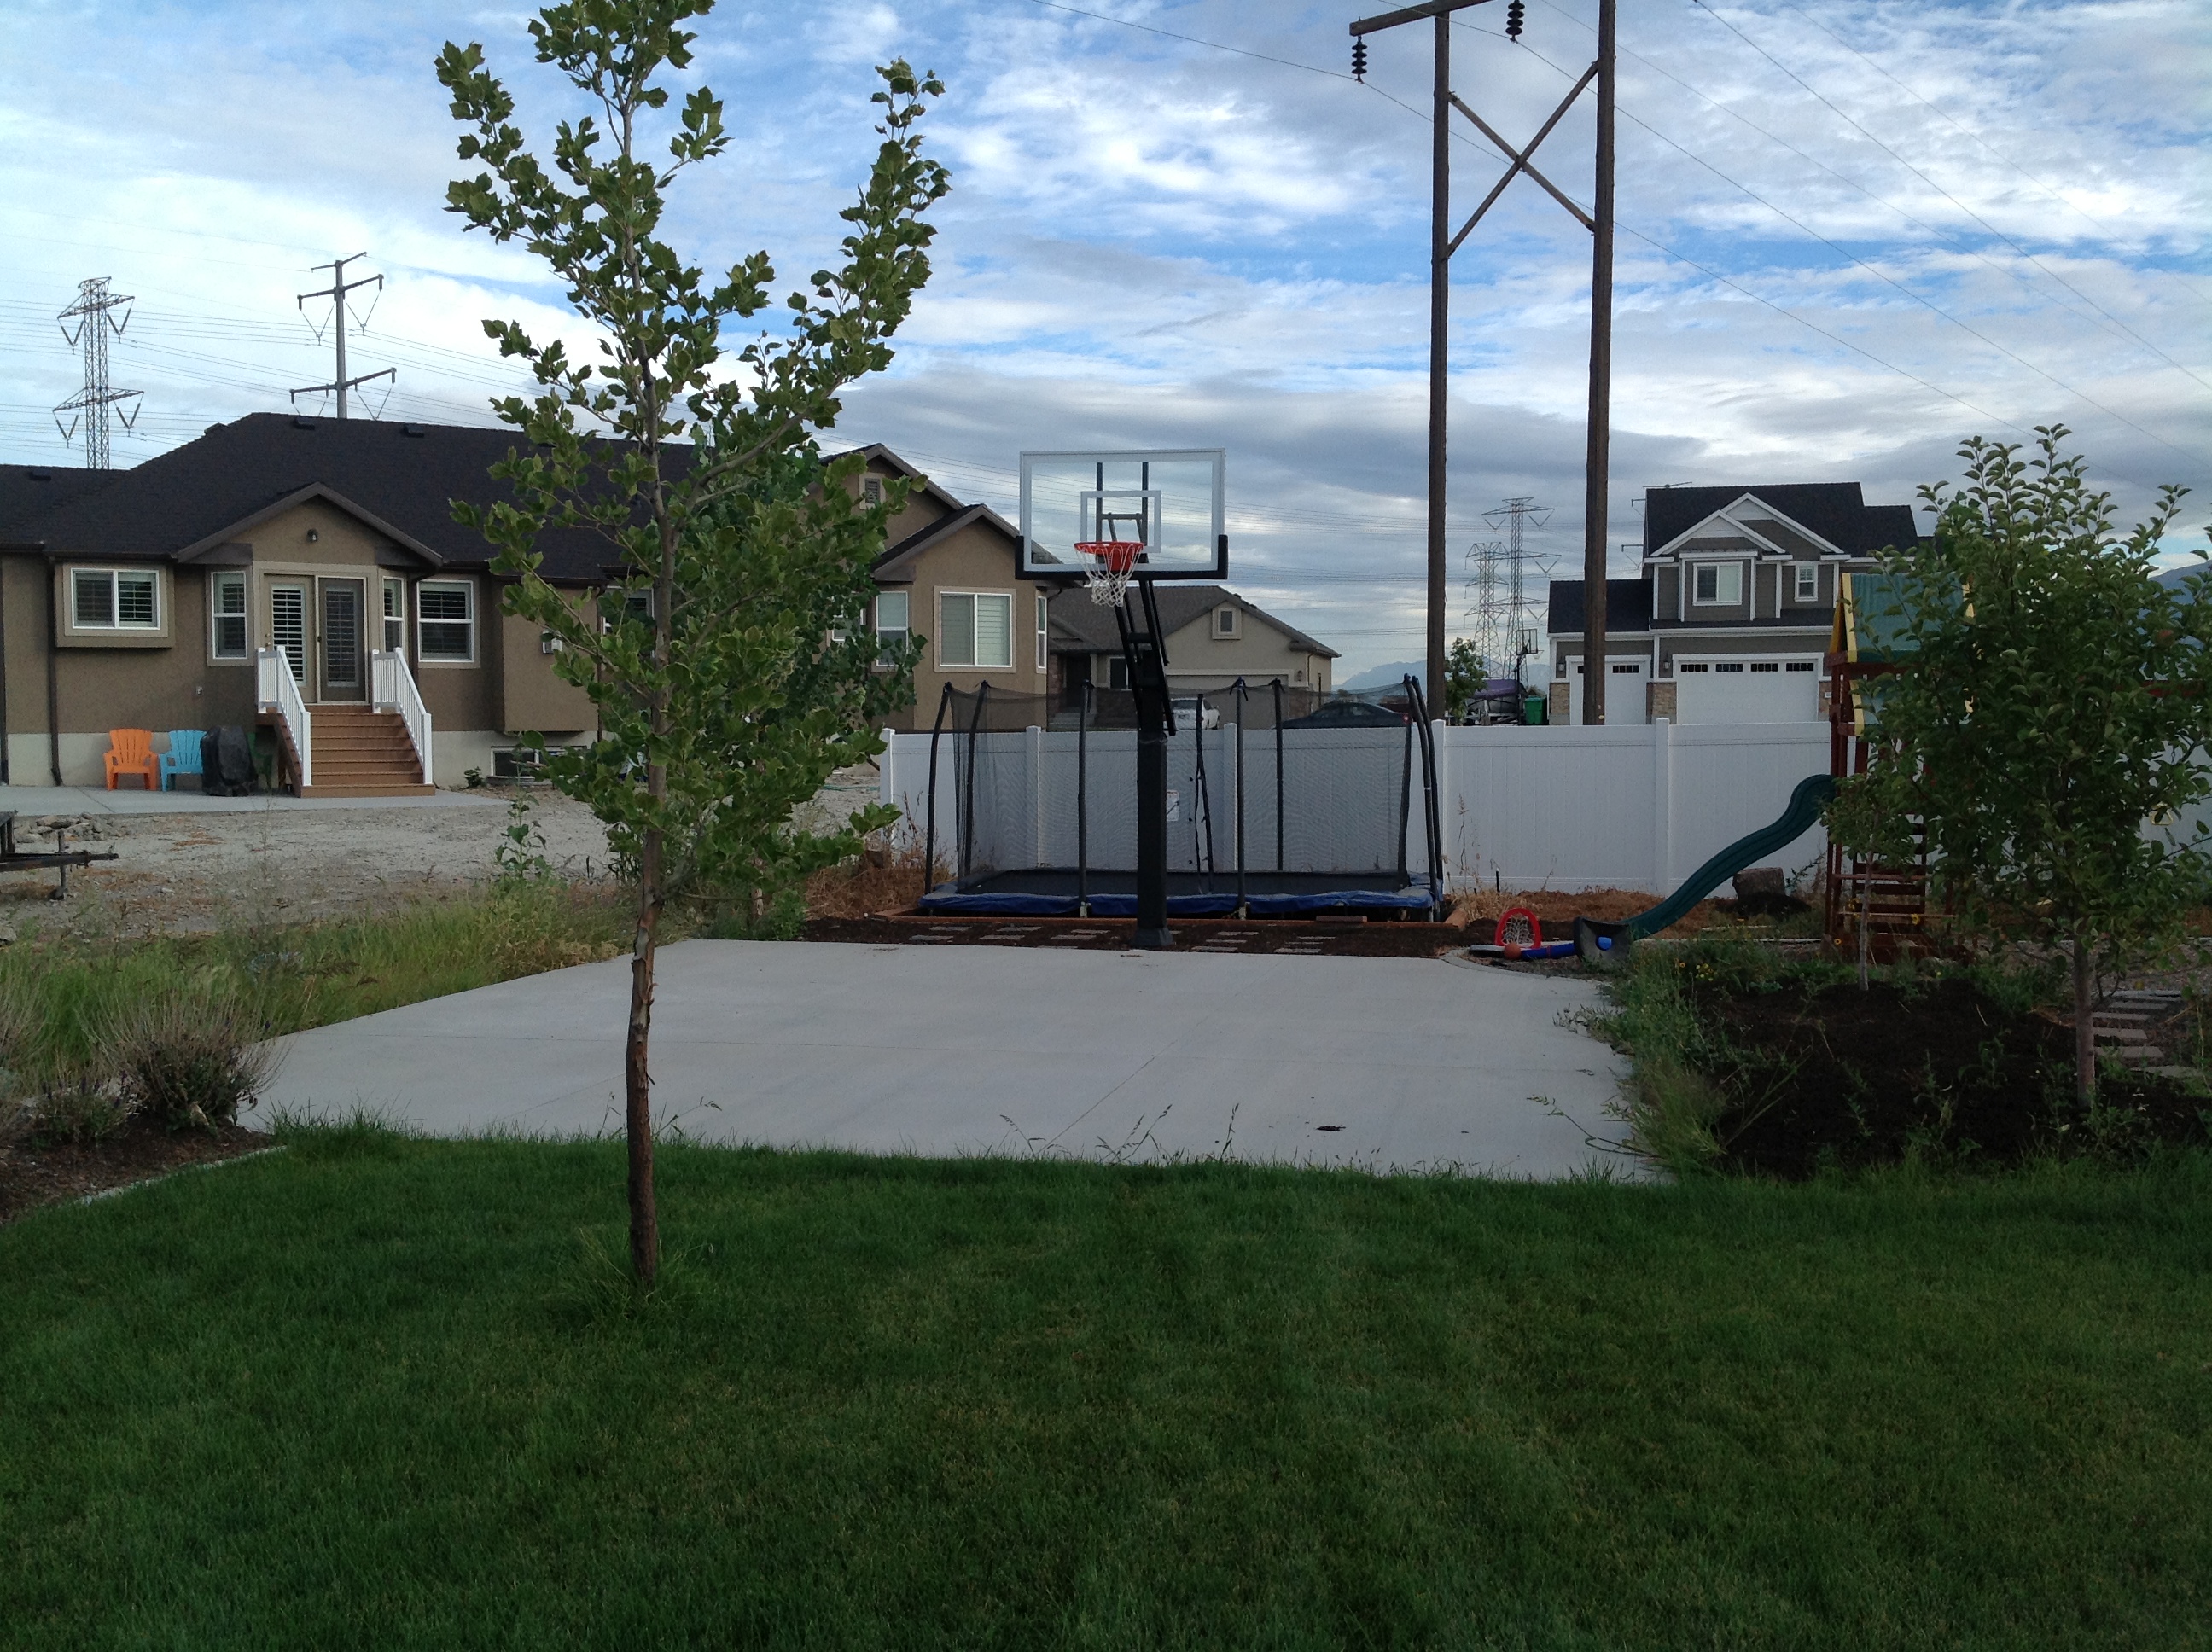 This fence works in conjunction with the the Pro Dunk basketball system to keep the ball close.